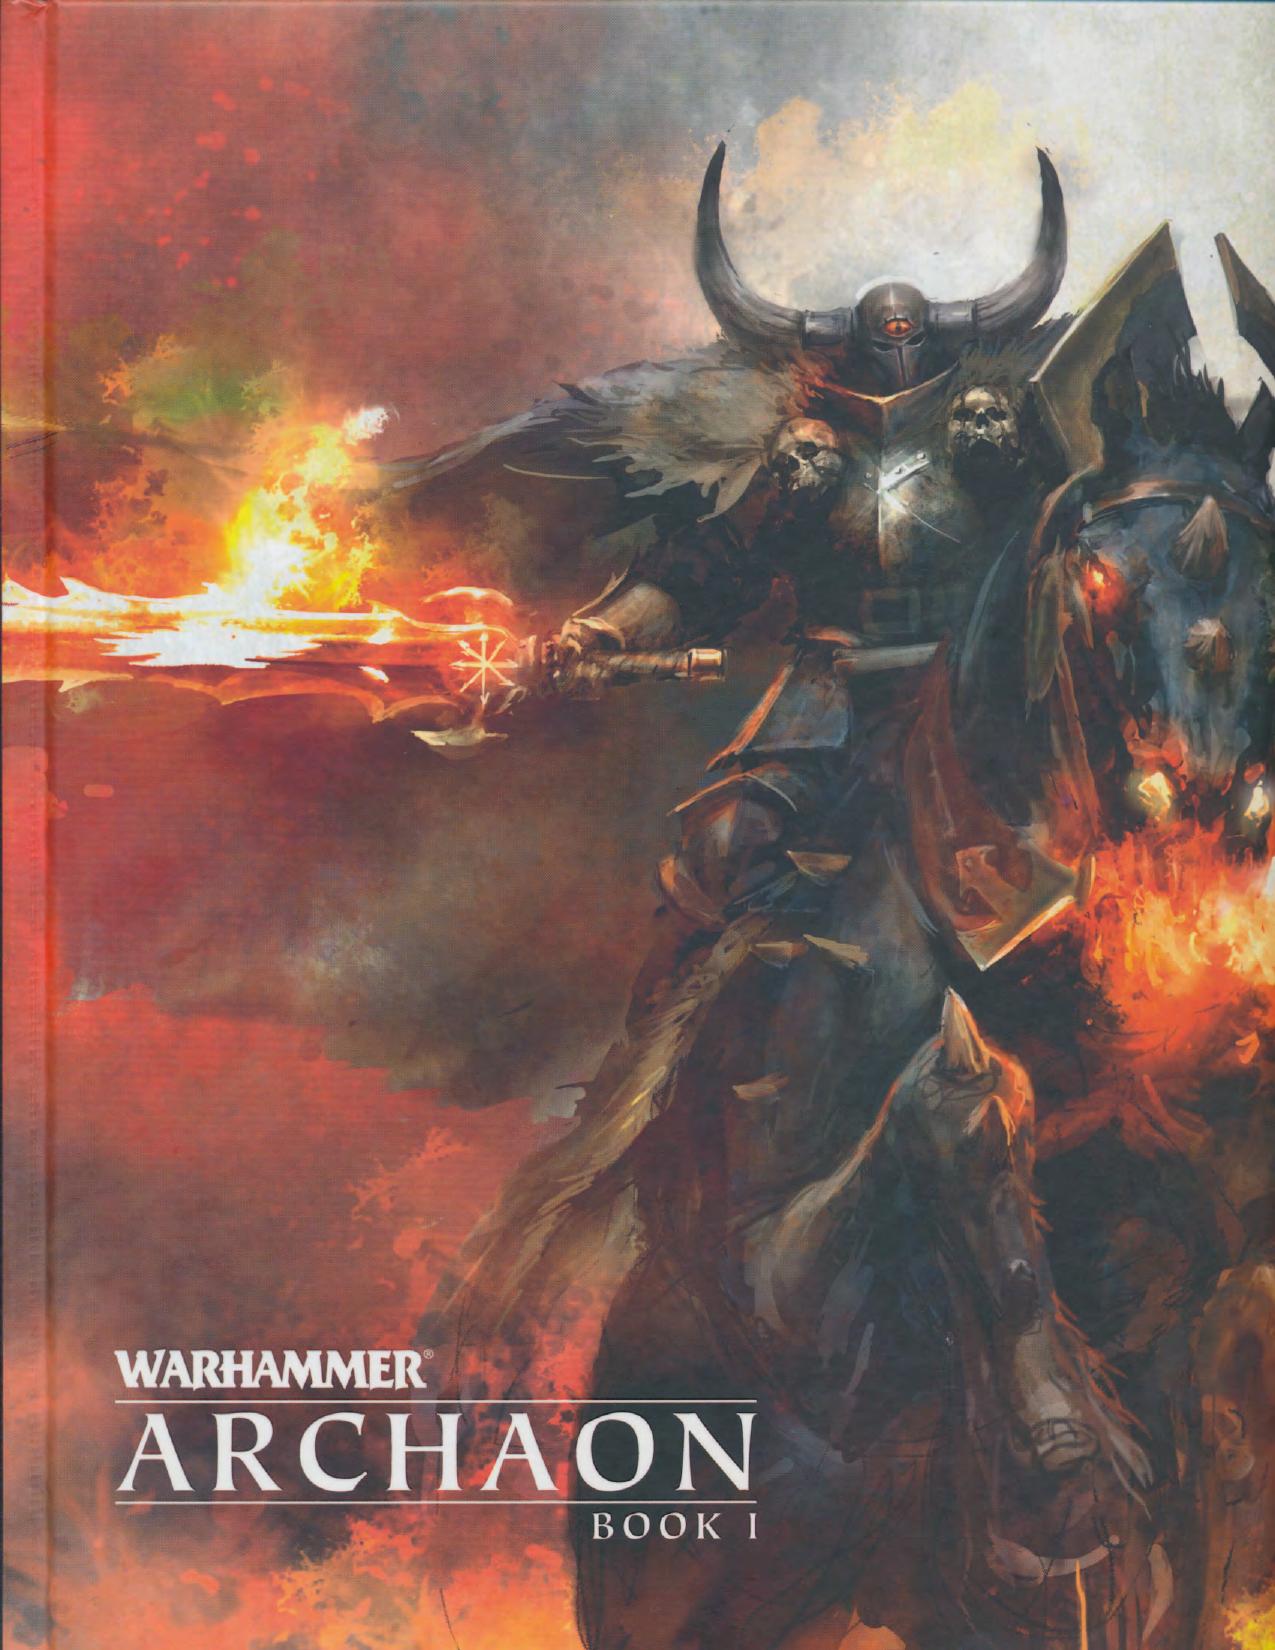 WFB 8e - The End Times, Vol 5 - Archaon - Book 1